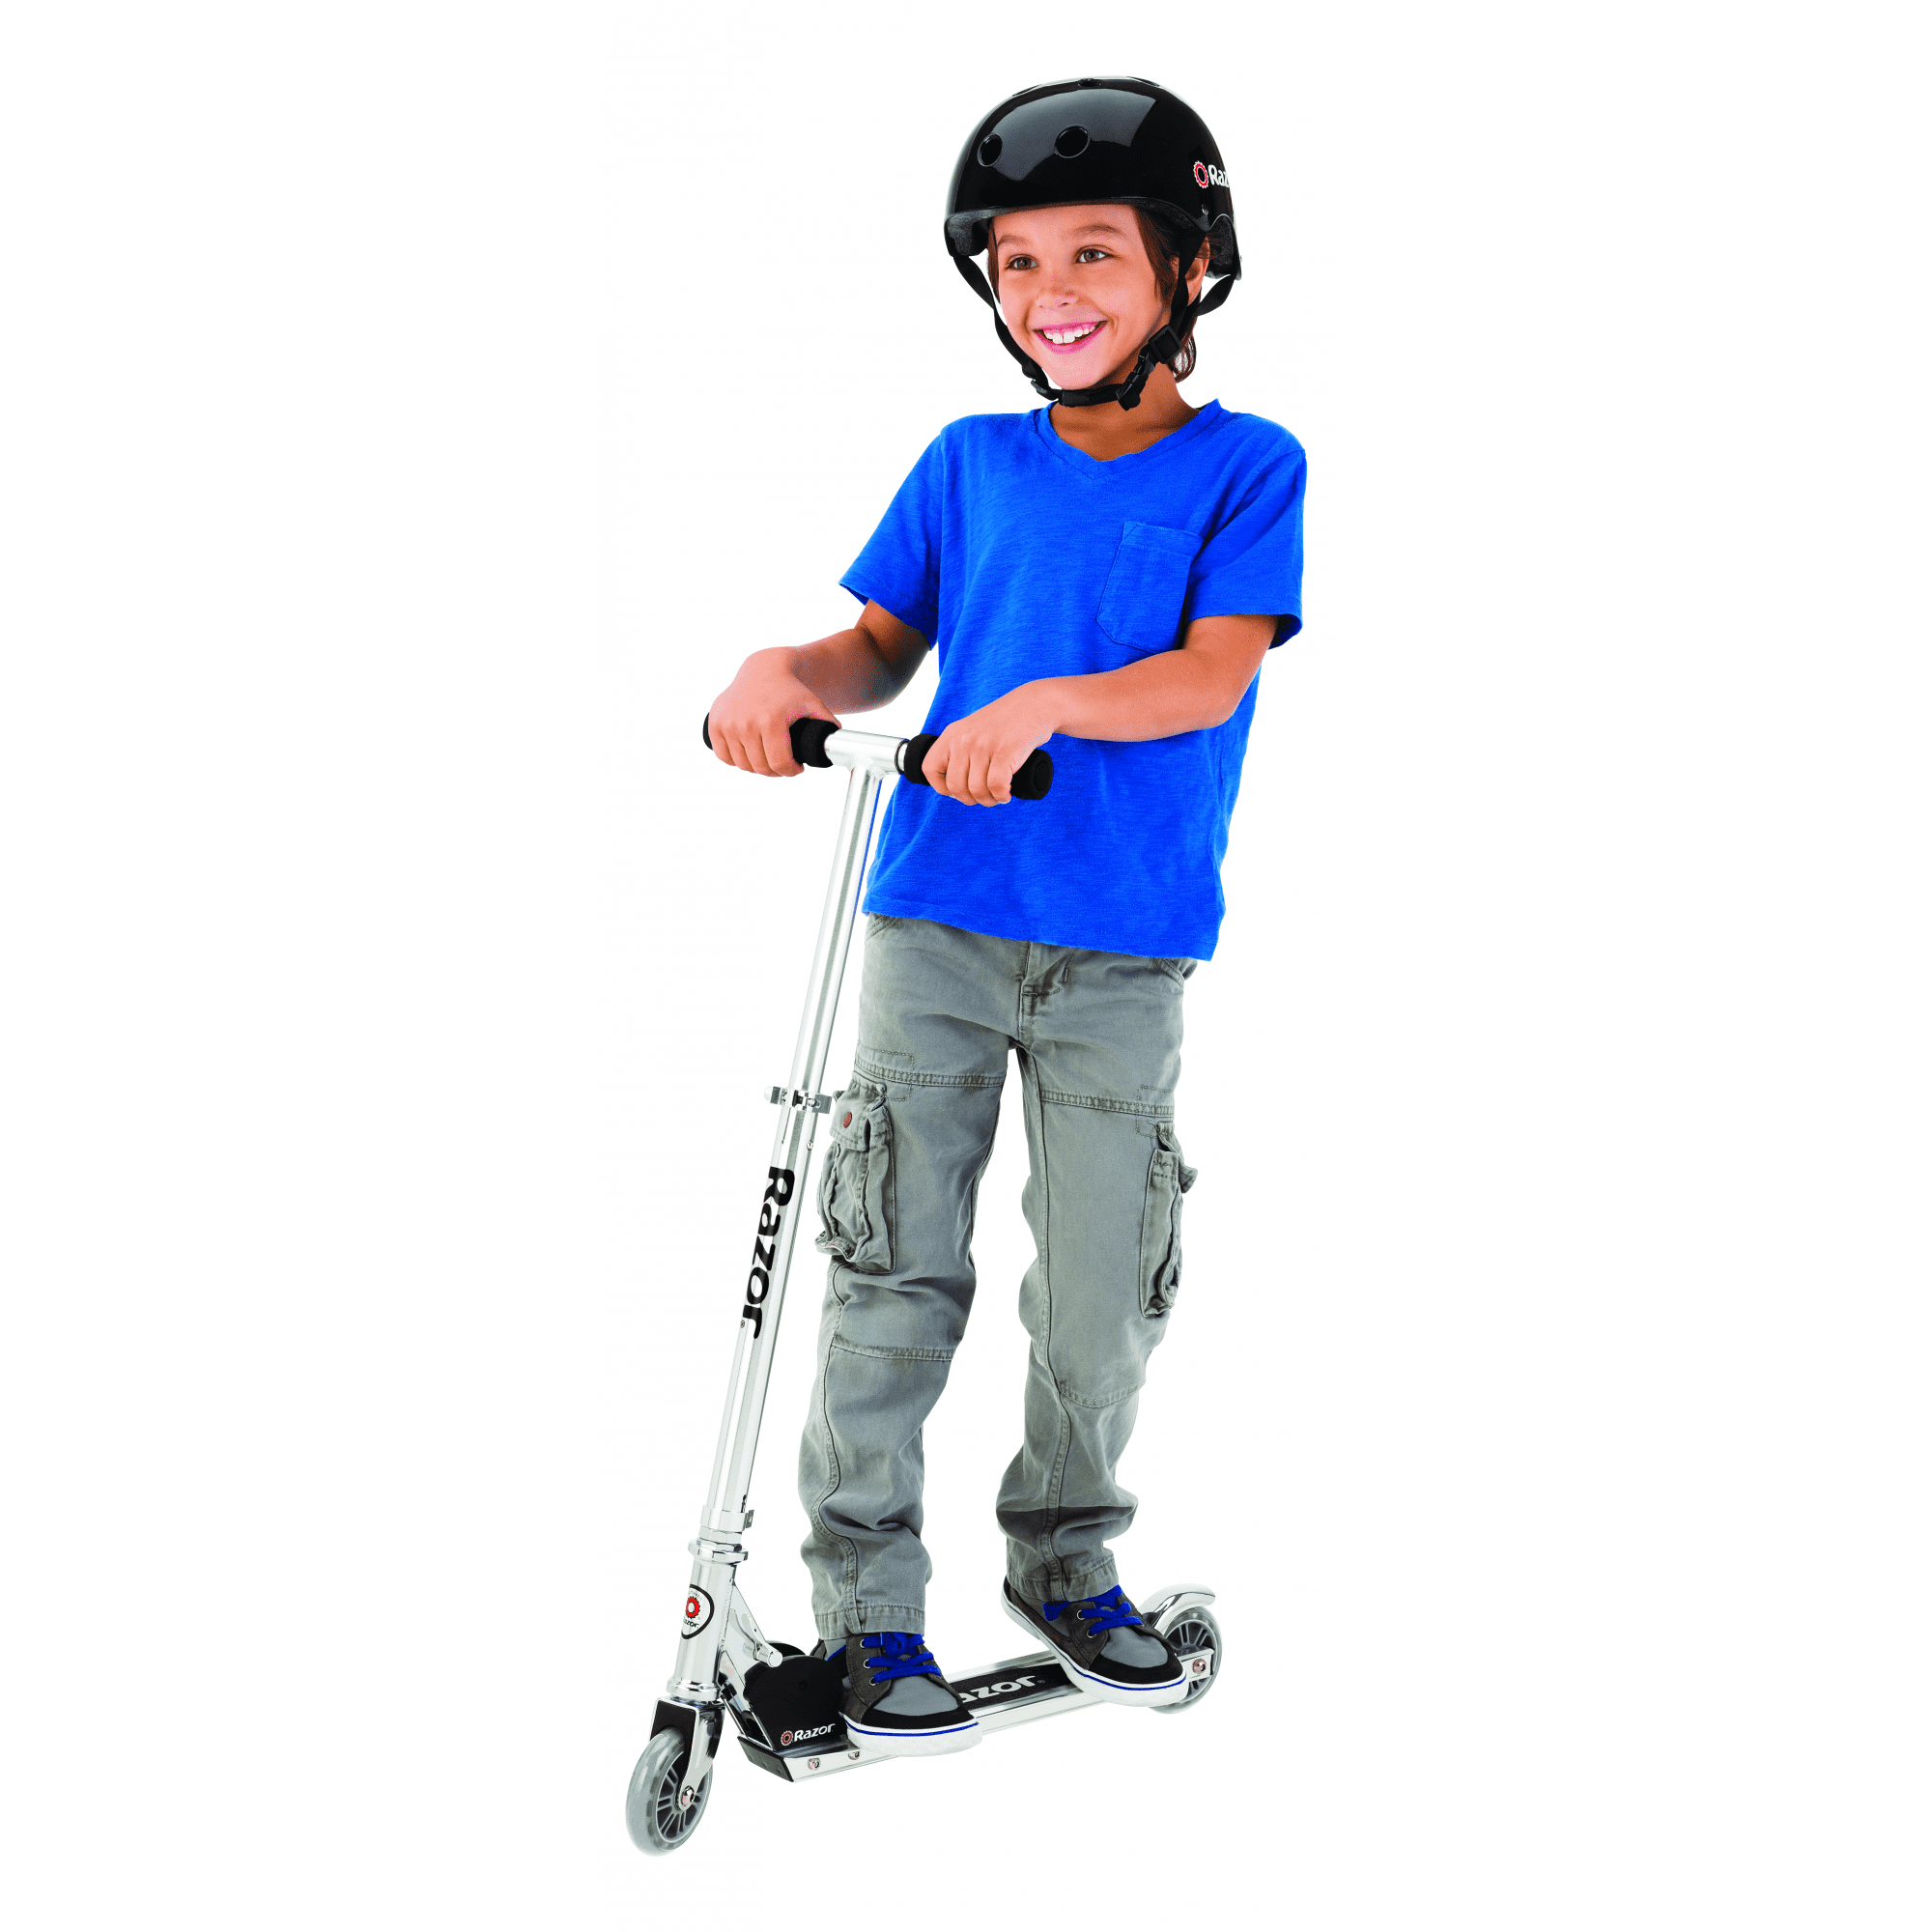 child on a scooter